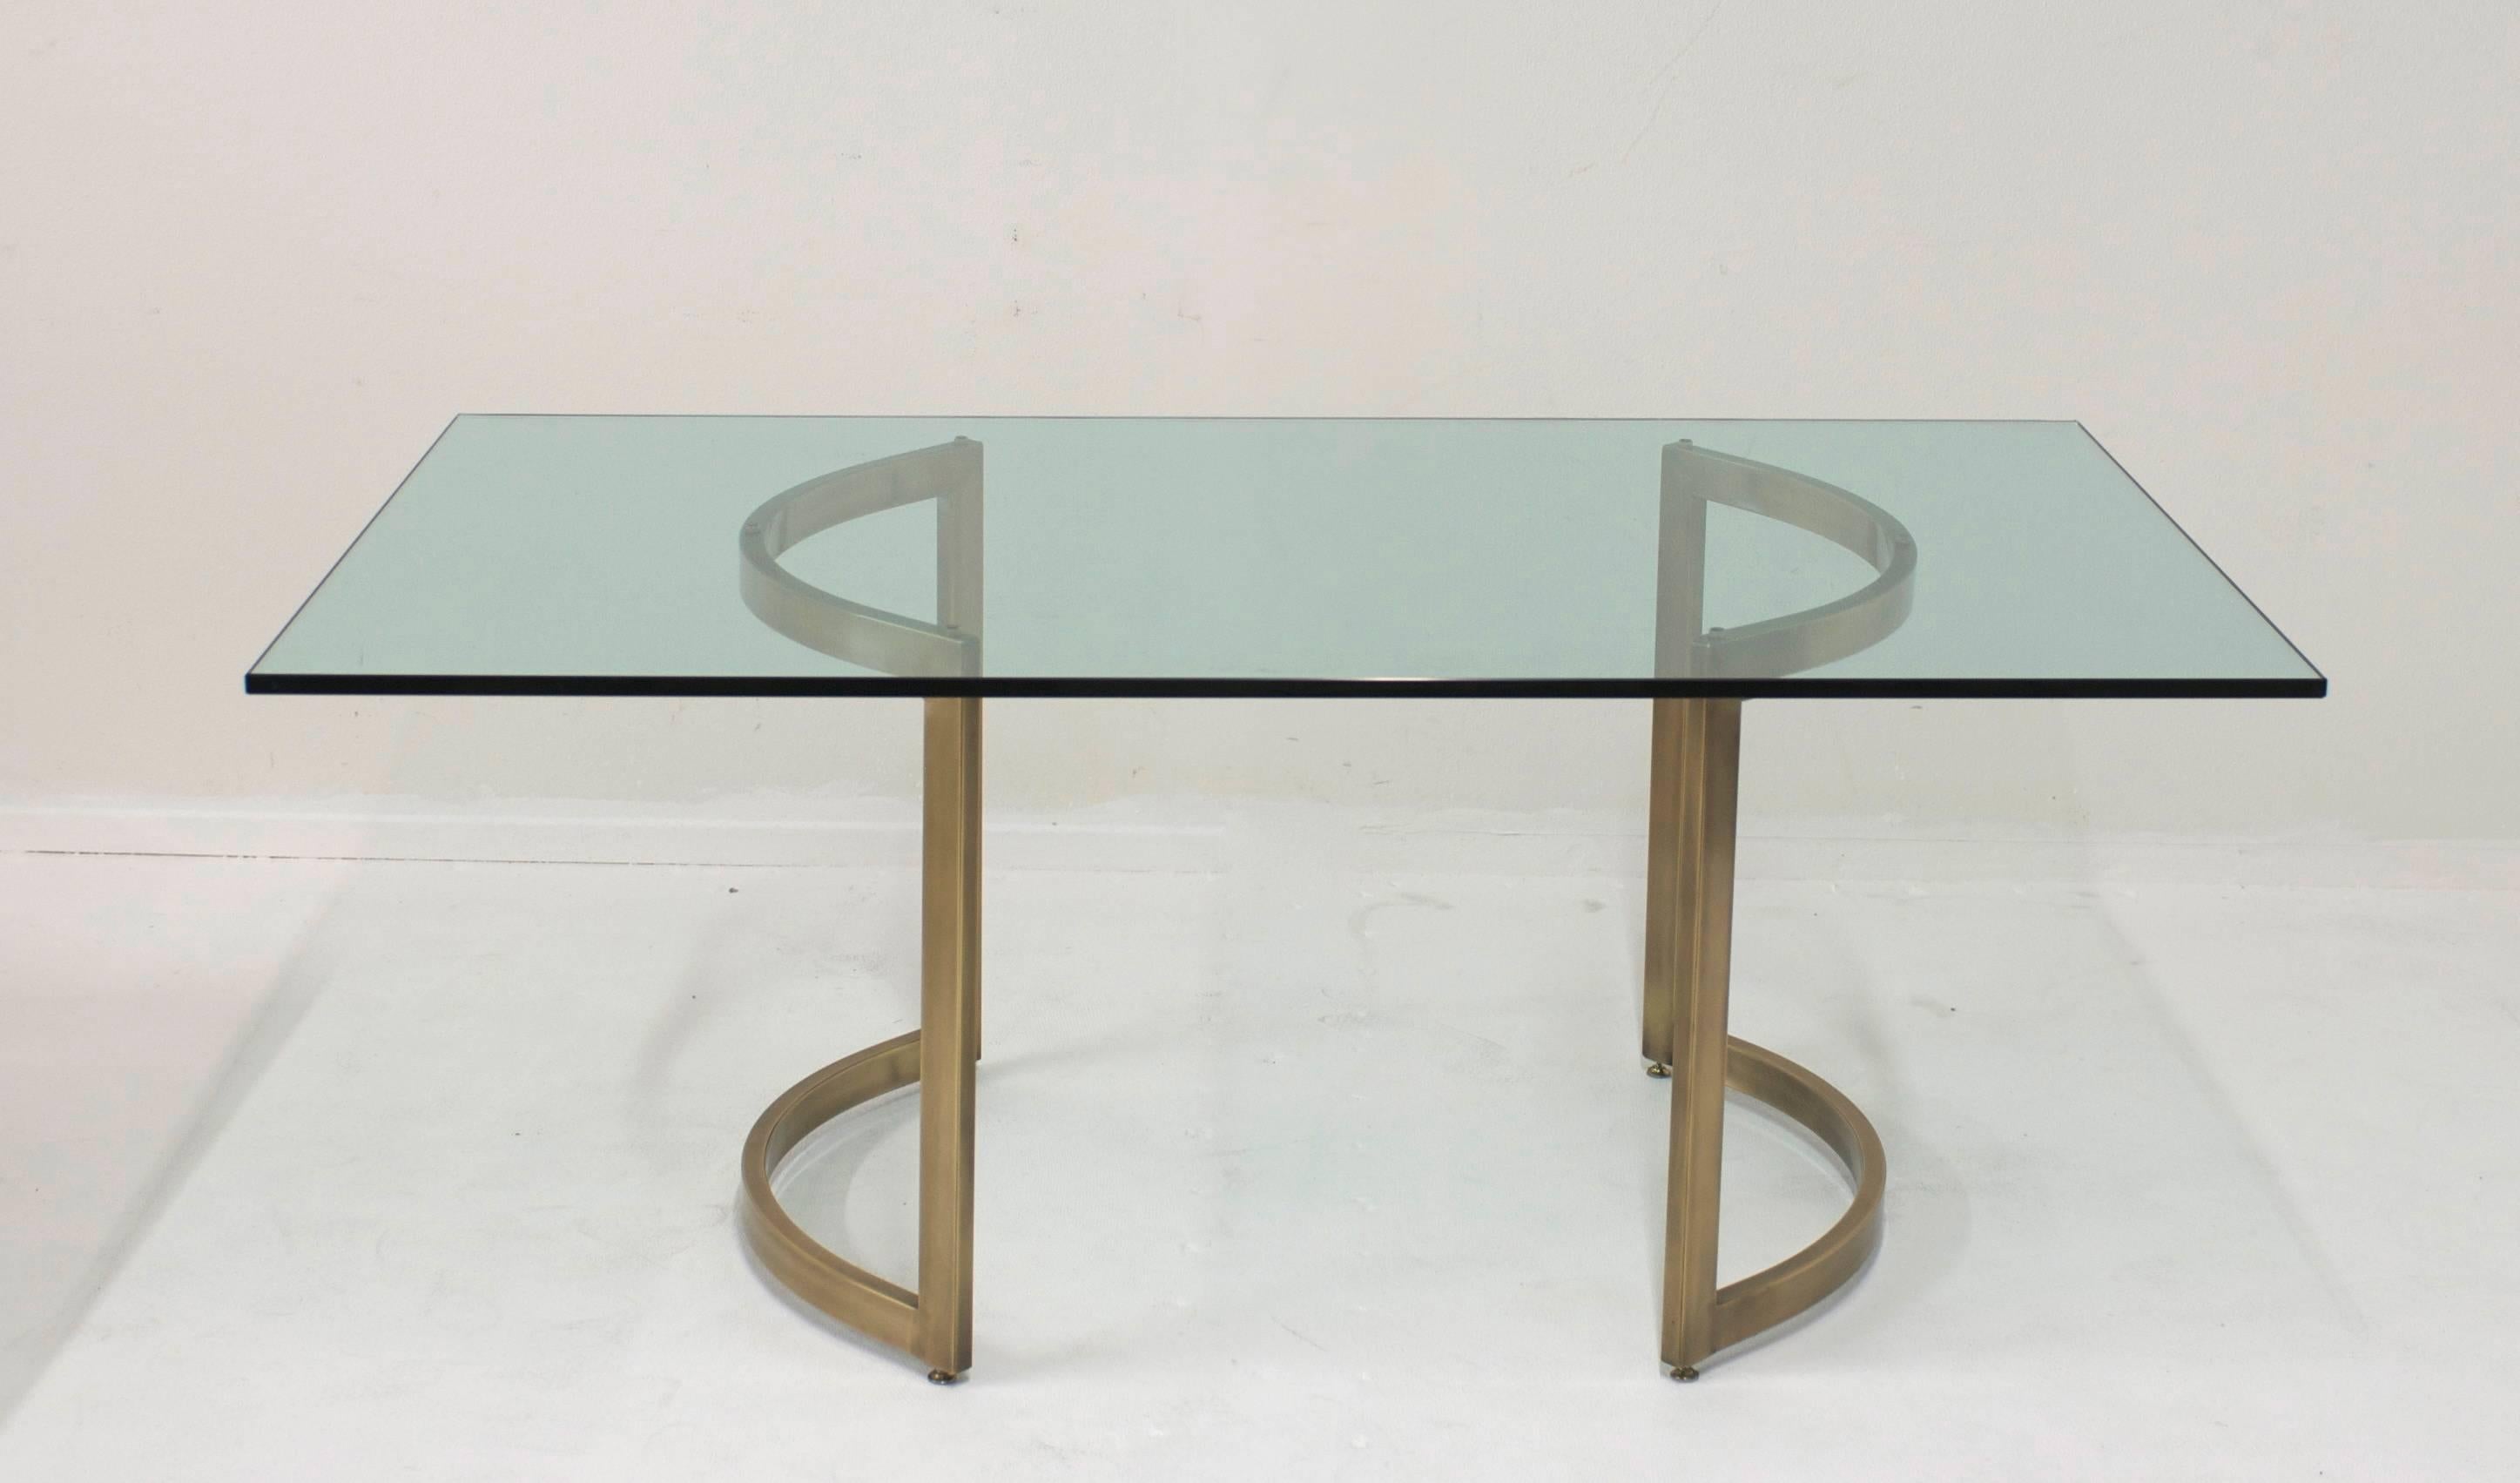 A dining table base designed by Milo Baughman (American B. 1923 - 2003) that has been plated in a warm burnished brass. The demilune shaped bases can be configured in a variety of ways. They can face each other to create a circle and could accept a